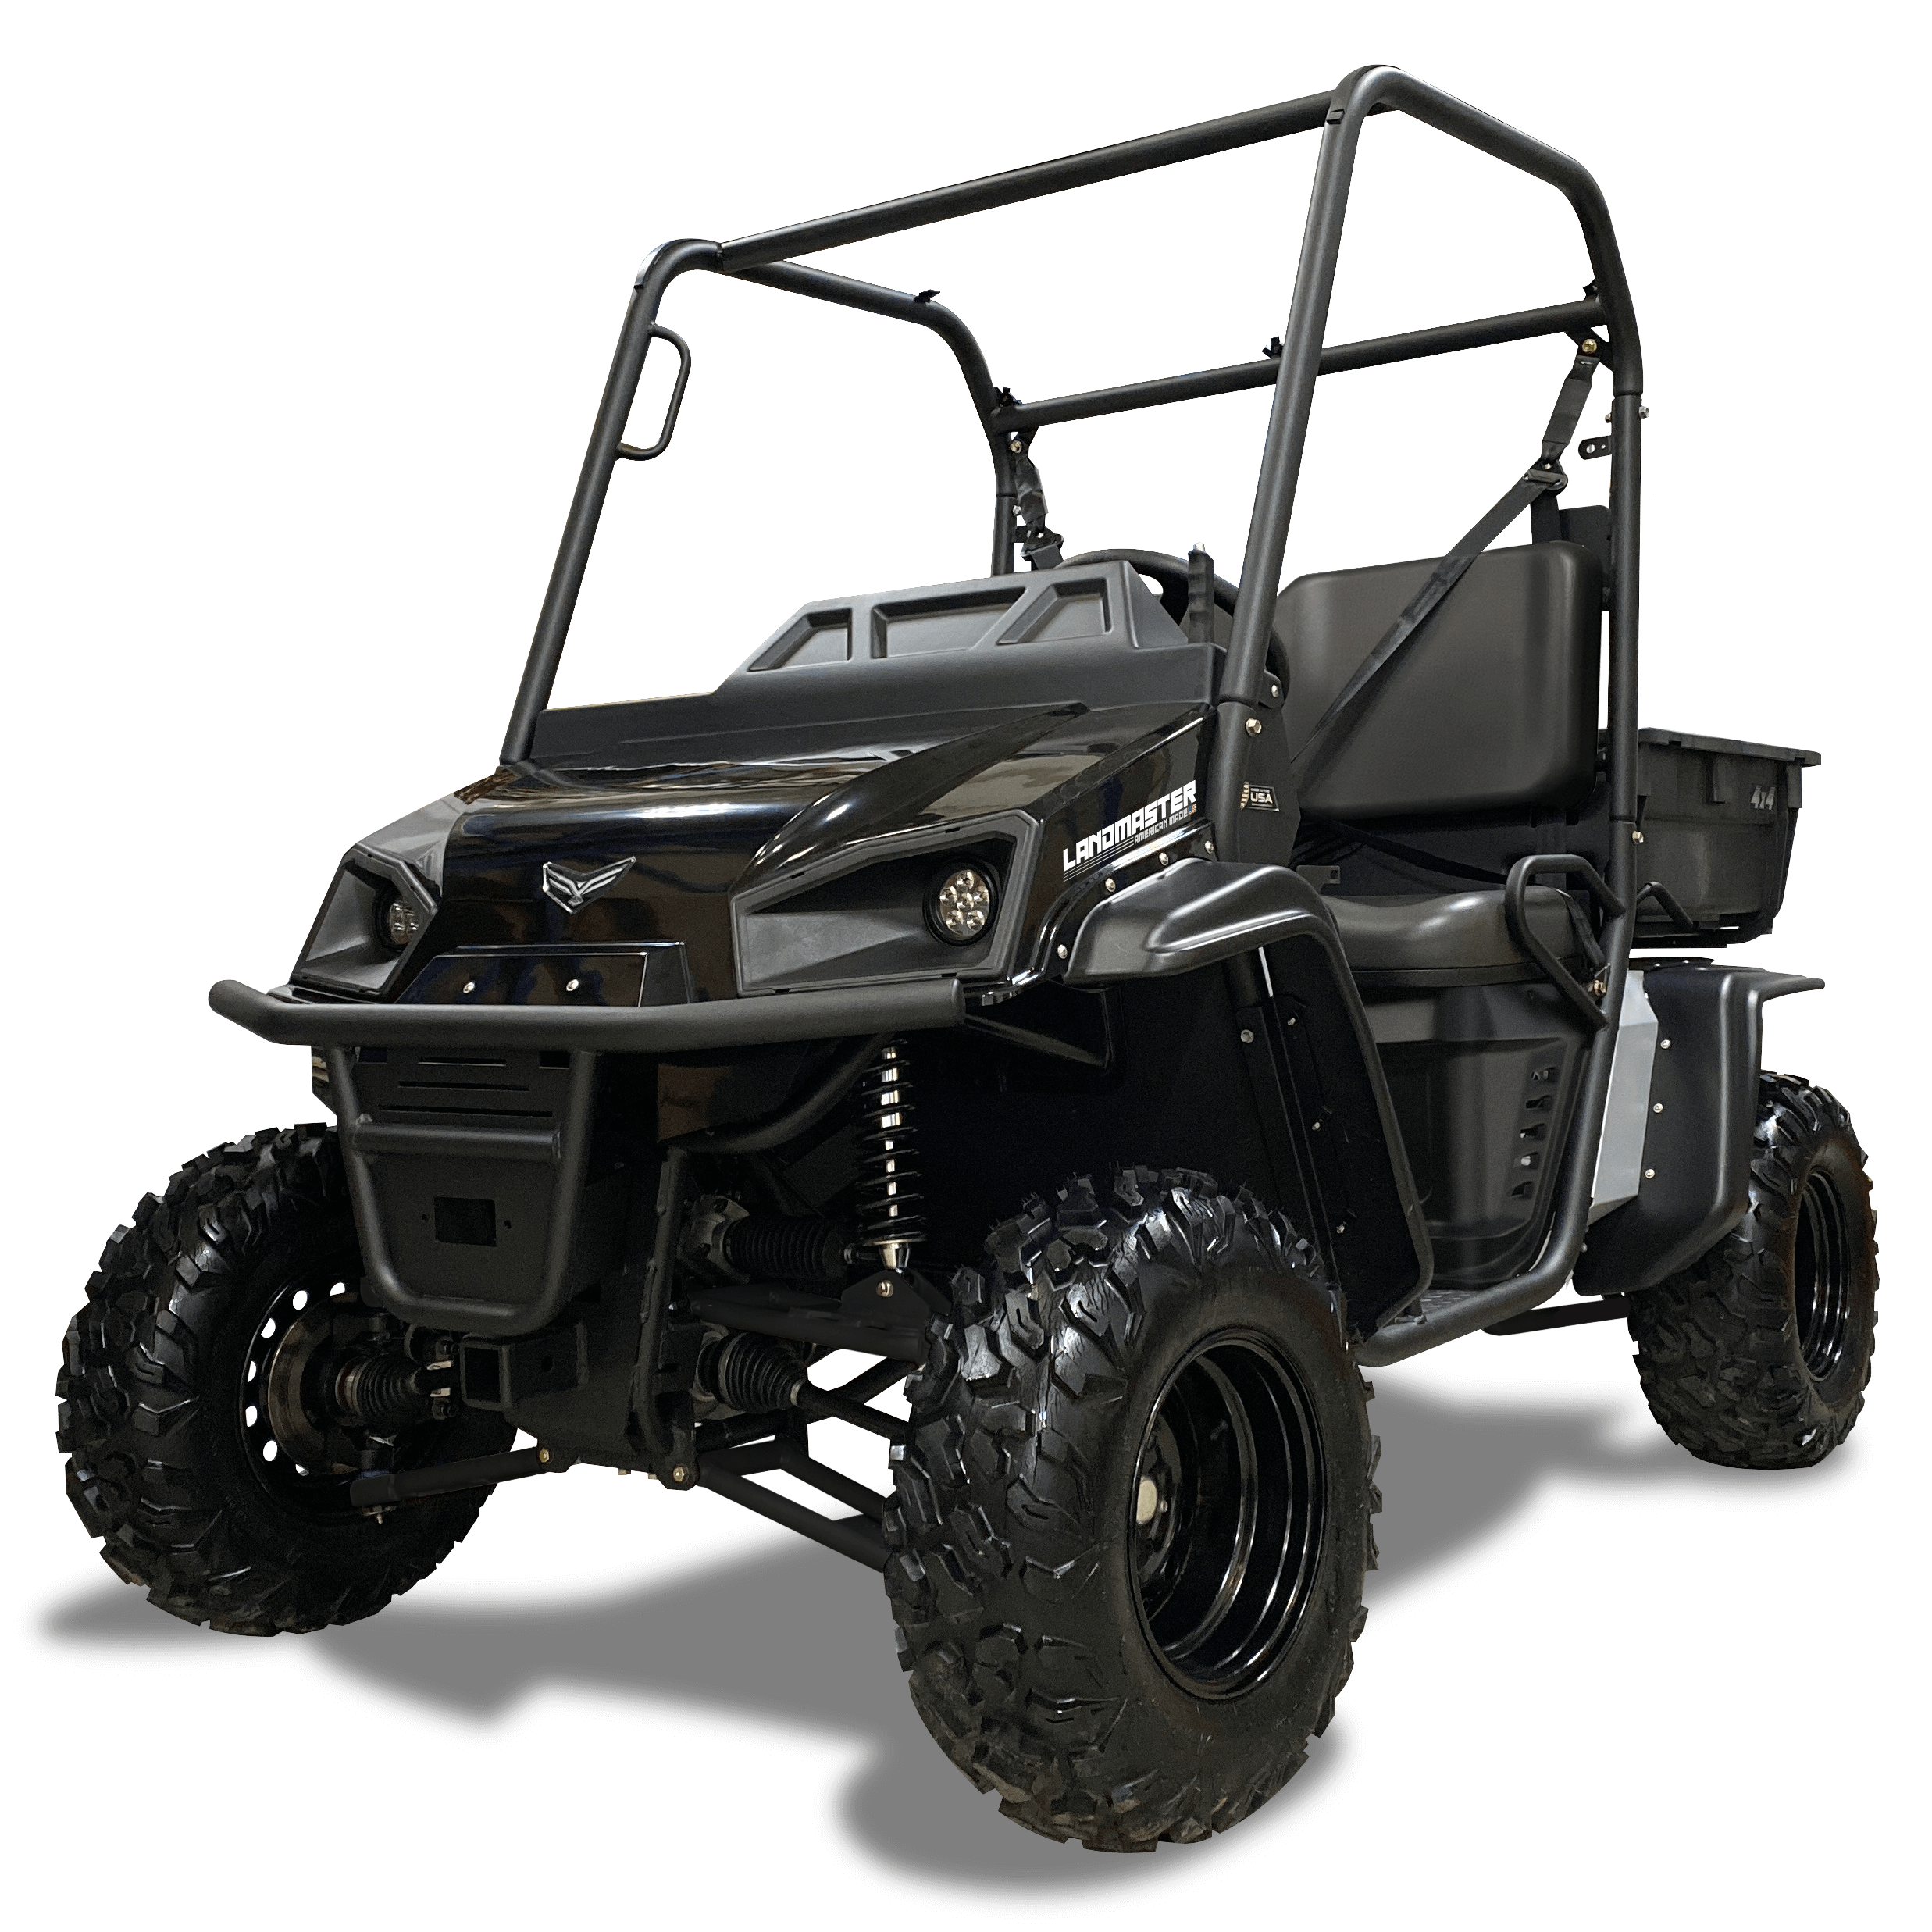 The industry’s hardest working, smoothest riding UTVs of its class.